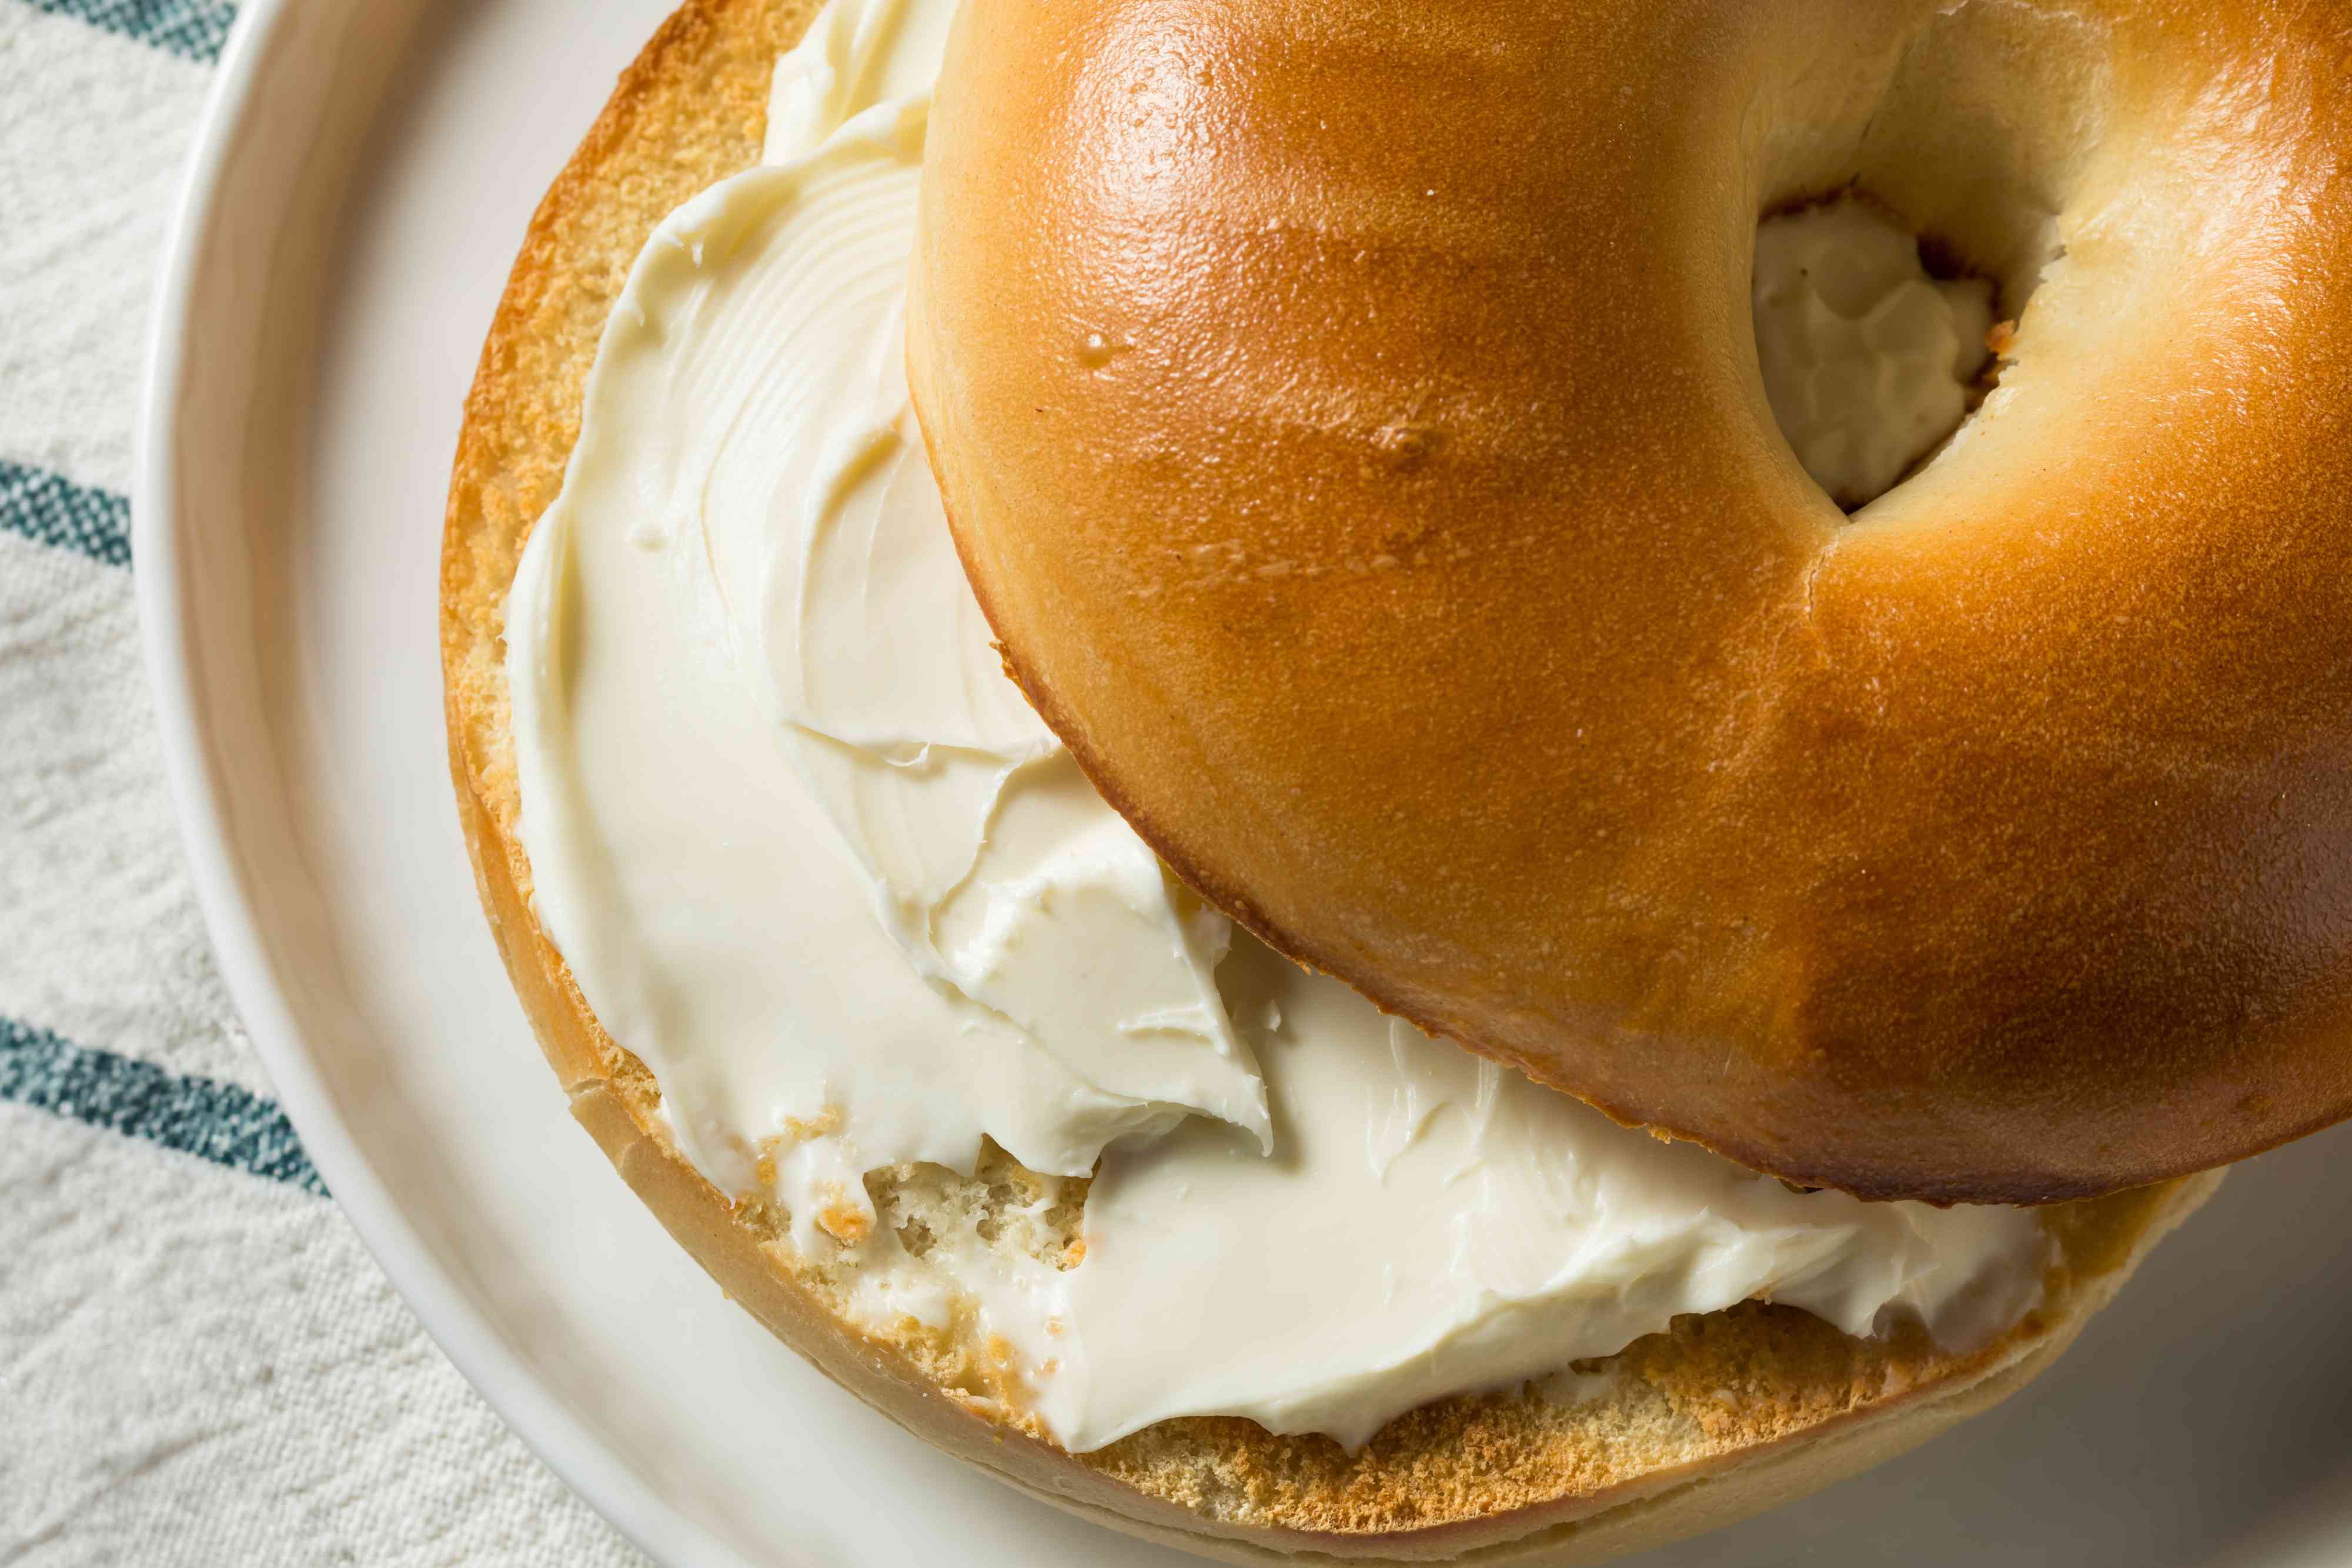 this new cream cheese is better (and cheaper) than philadelphia, according to a food editor